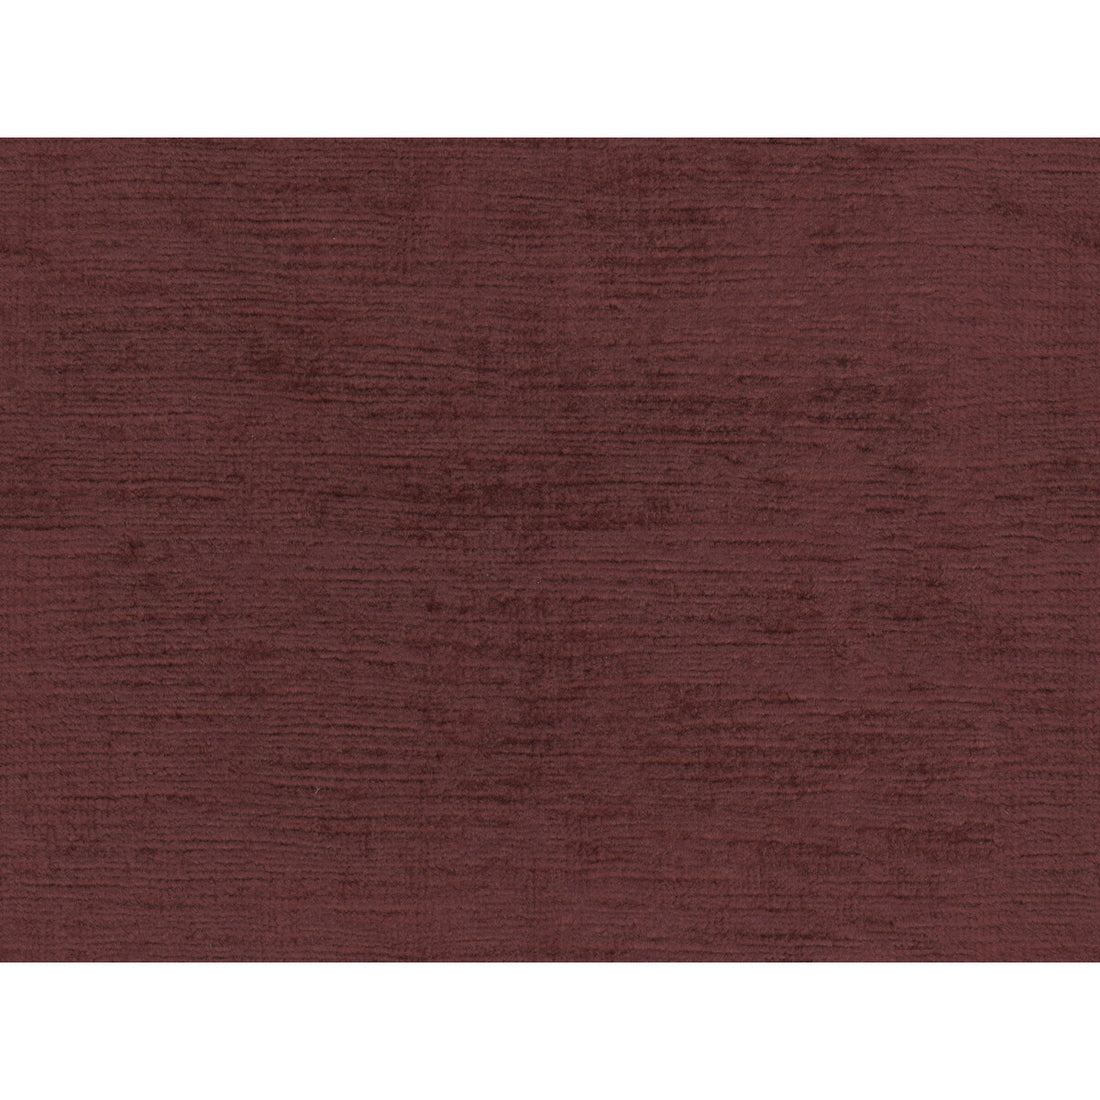 Fulham Linen V fabric in merlot color - pattern 2016133.1910.0 - by Lee Jofa